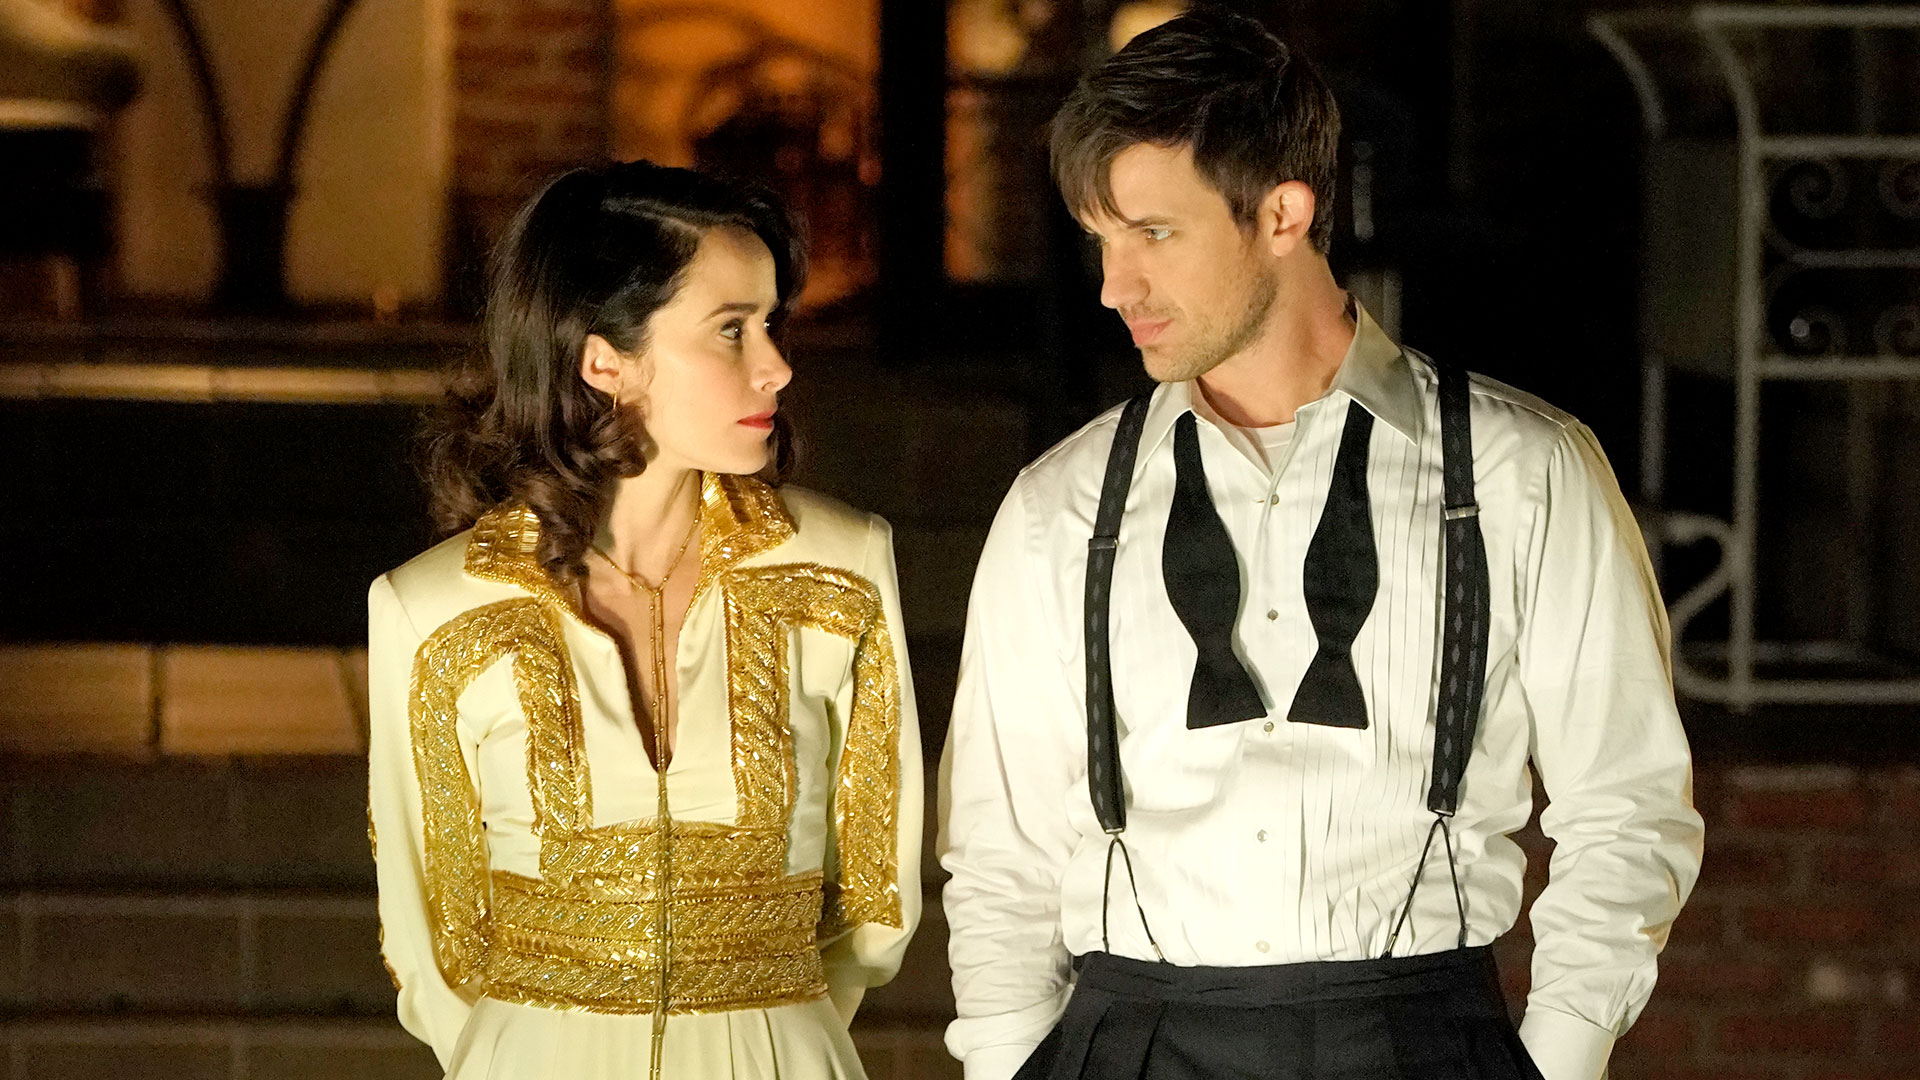 Timeless Season 2 Episode 3 A Hollywood Love Story